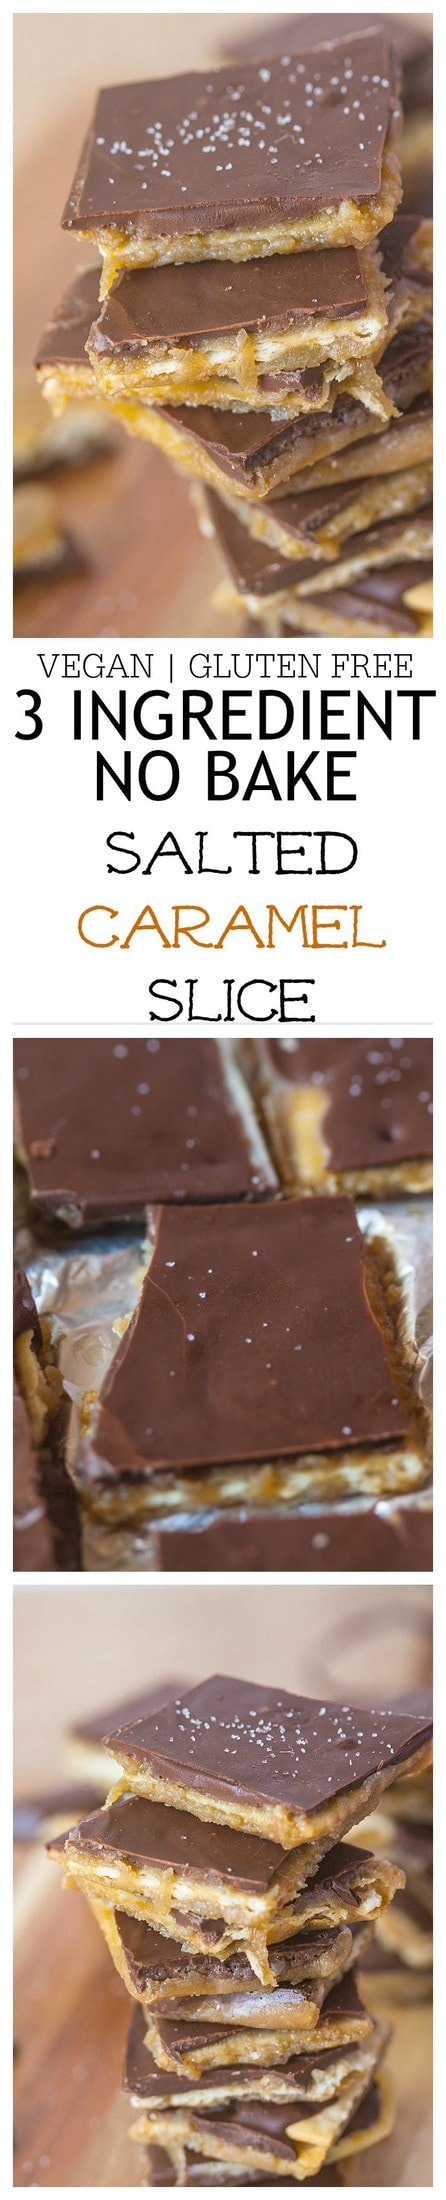 Healthy No Bake Salted Caramel Slice- A healthy twist on a classic caramel slice- This Healthy No Bake Salted Caramel Slice is high fiber, vegan, gluten free and refined sugar free- A sweet and salty treat which is super simple to whip up! @thebigmansworld - thebigmansworld.com